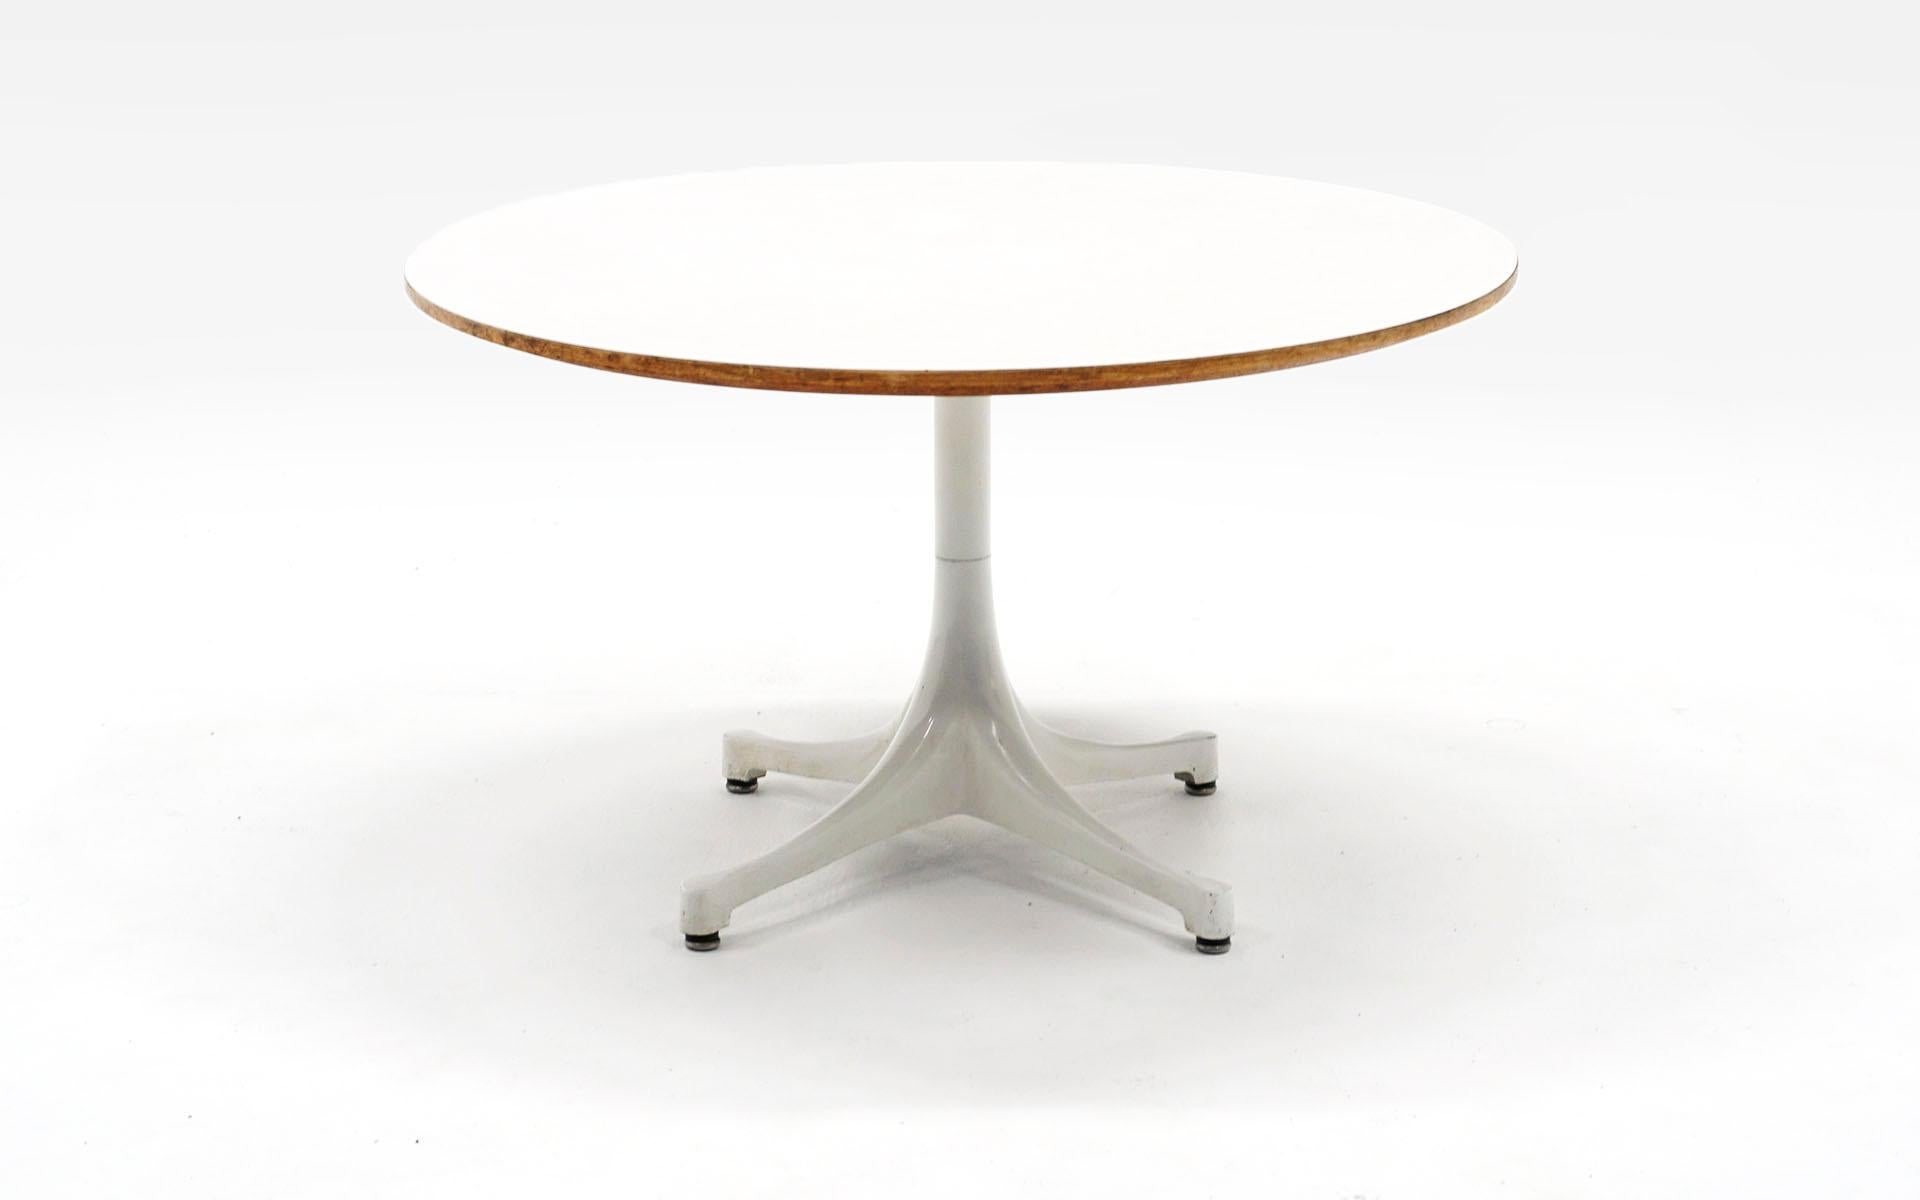 Round white pedestal coffee / side table designed by Irving Harper for the George Nelson Office and made by Herman Miller between 1954-1957. Signed with the early Herman Miller George Nelson round white metal medallion. White laminate top and